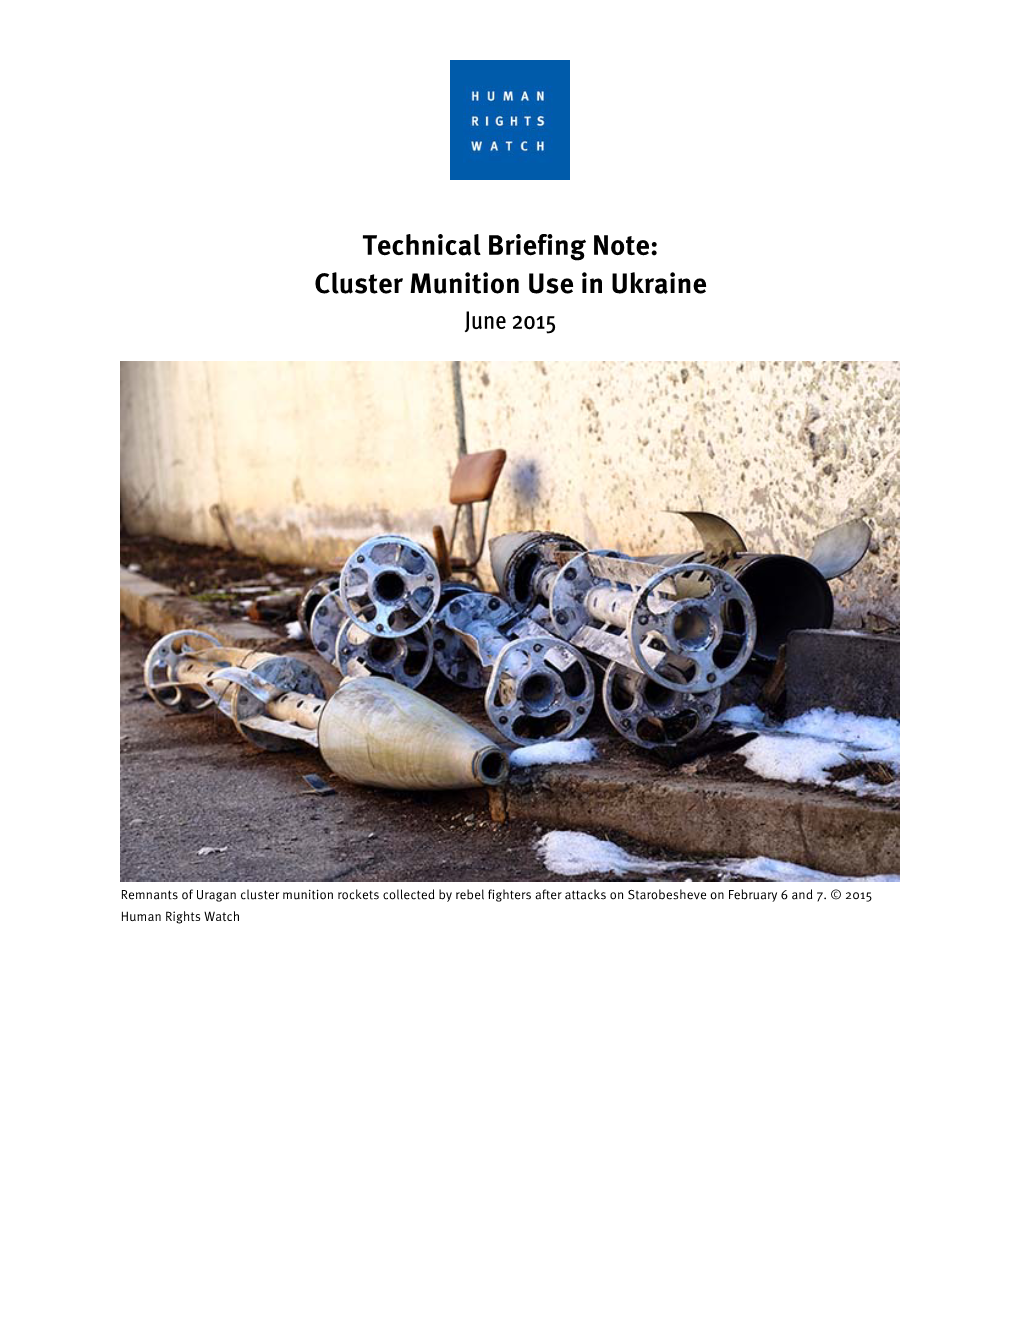 Technical Briefing Note: Cluster Munition Use in Ukraine June 2015